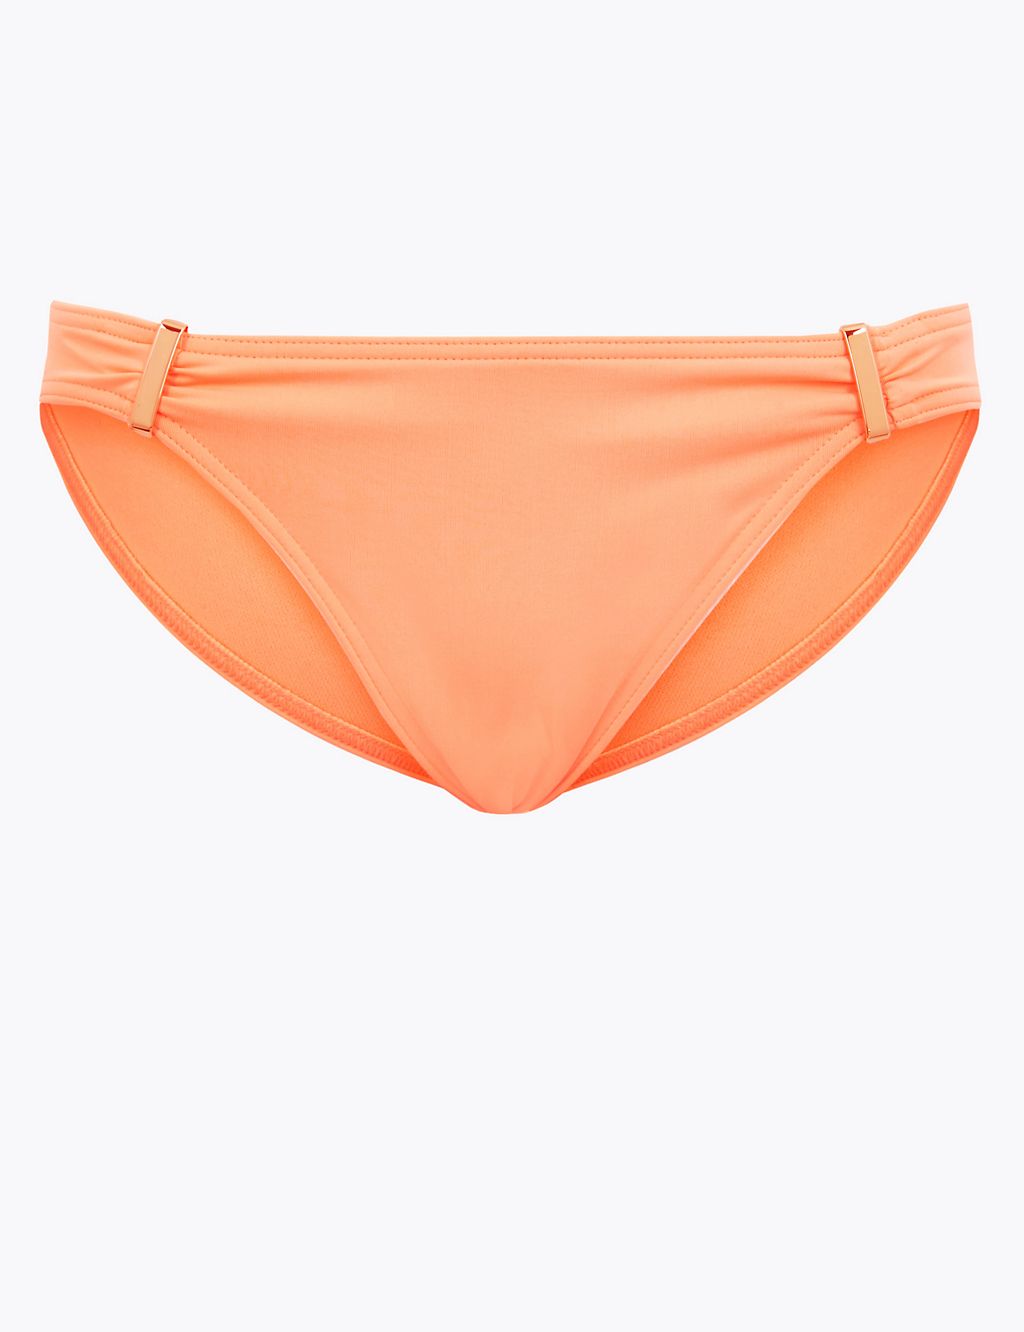 Ring Detail Hipster Bikini Bottoms | M&S Collection | M&S